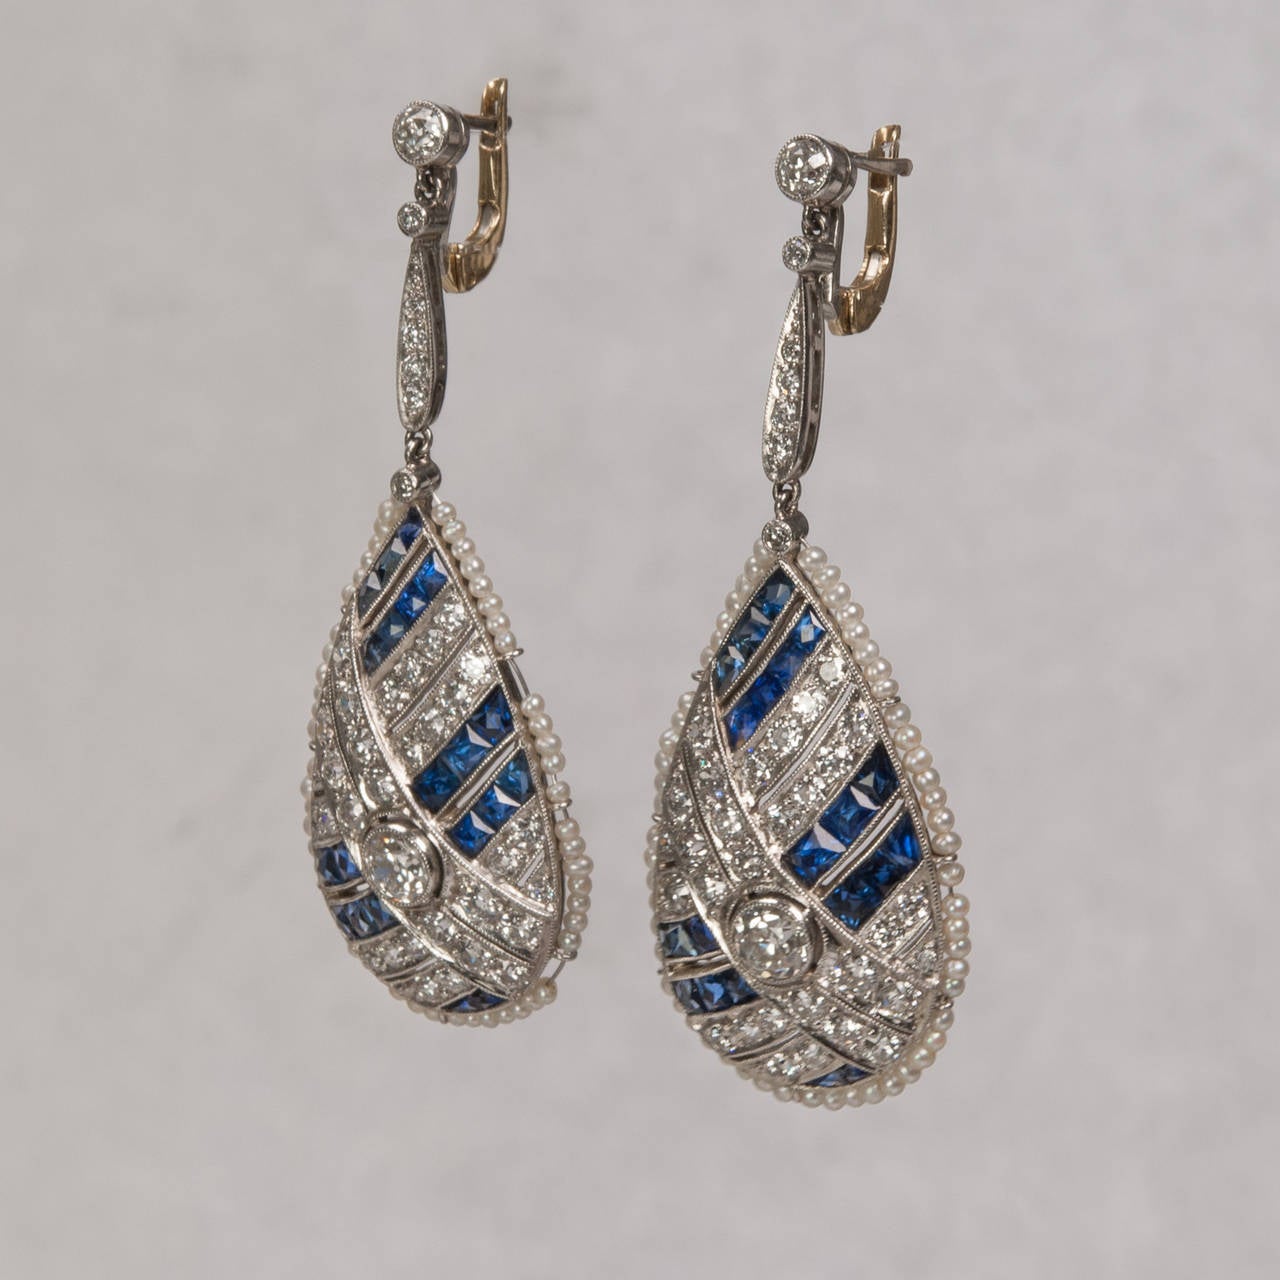 A dazzling set of diamond and sapphire dangle earrings .The center Old European cut diamonds weigh approximately .50 carats each and the remaining accent diamonds total approximately 2.00 carats. Each earring is accented by vibrant custom cut french